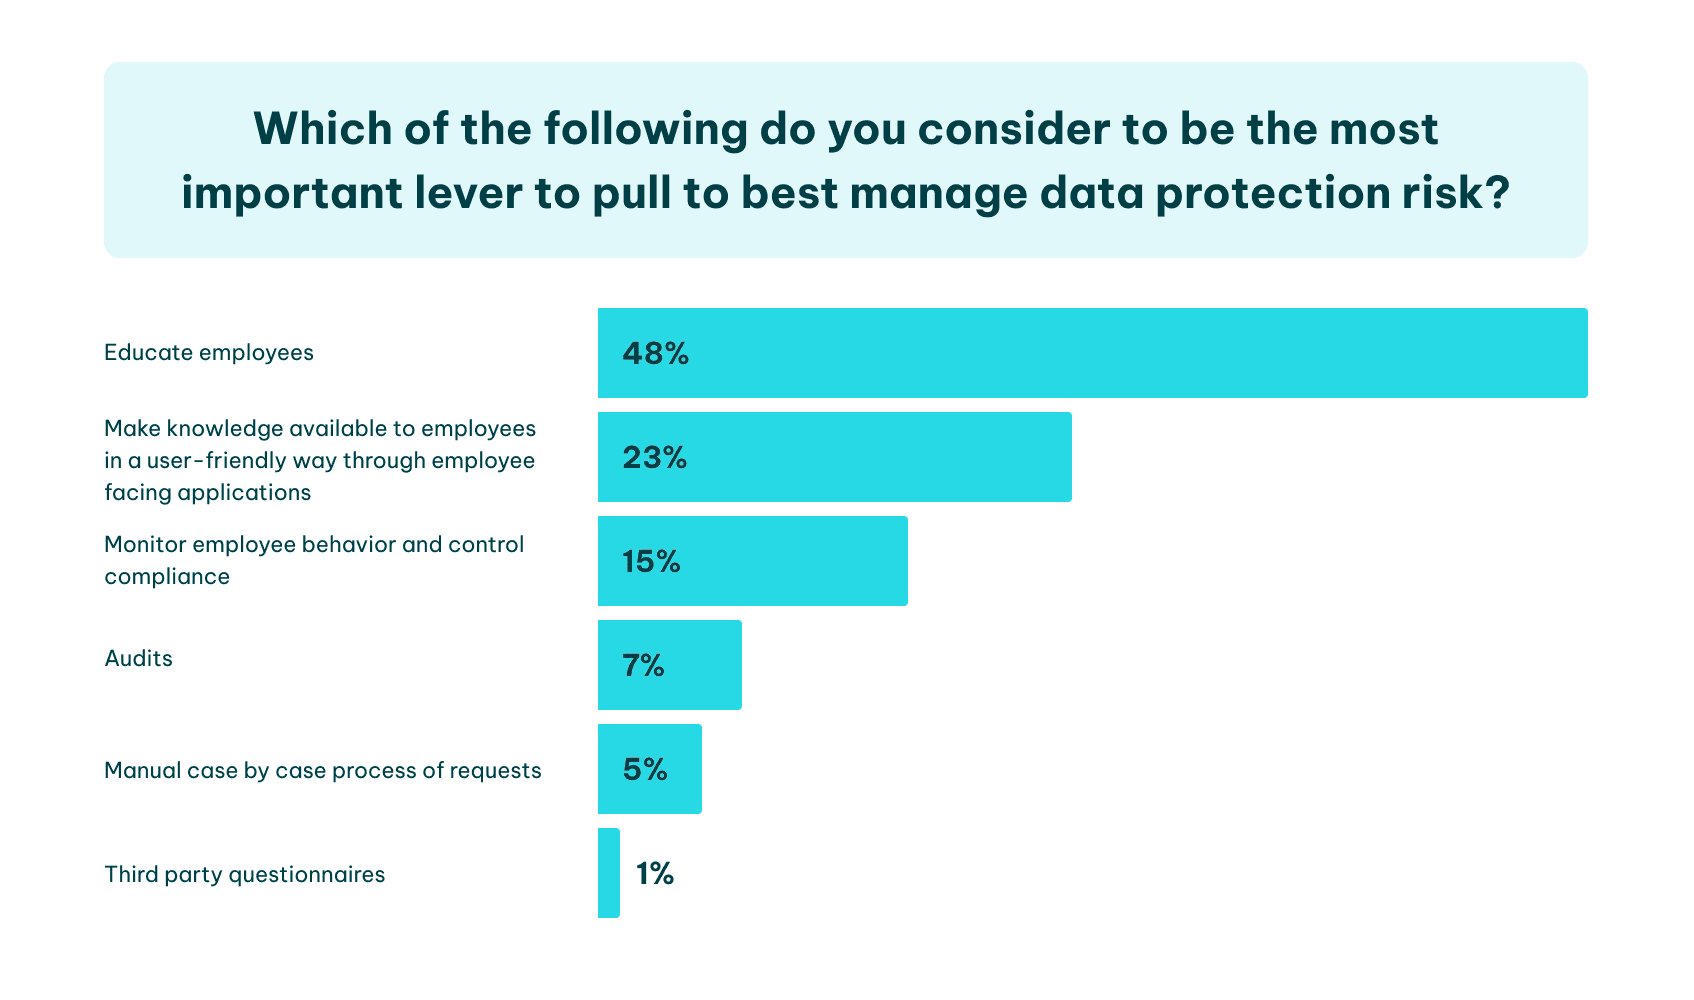 Most important lever to pull to best manage data protection risk_847x500.png